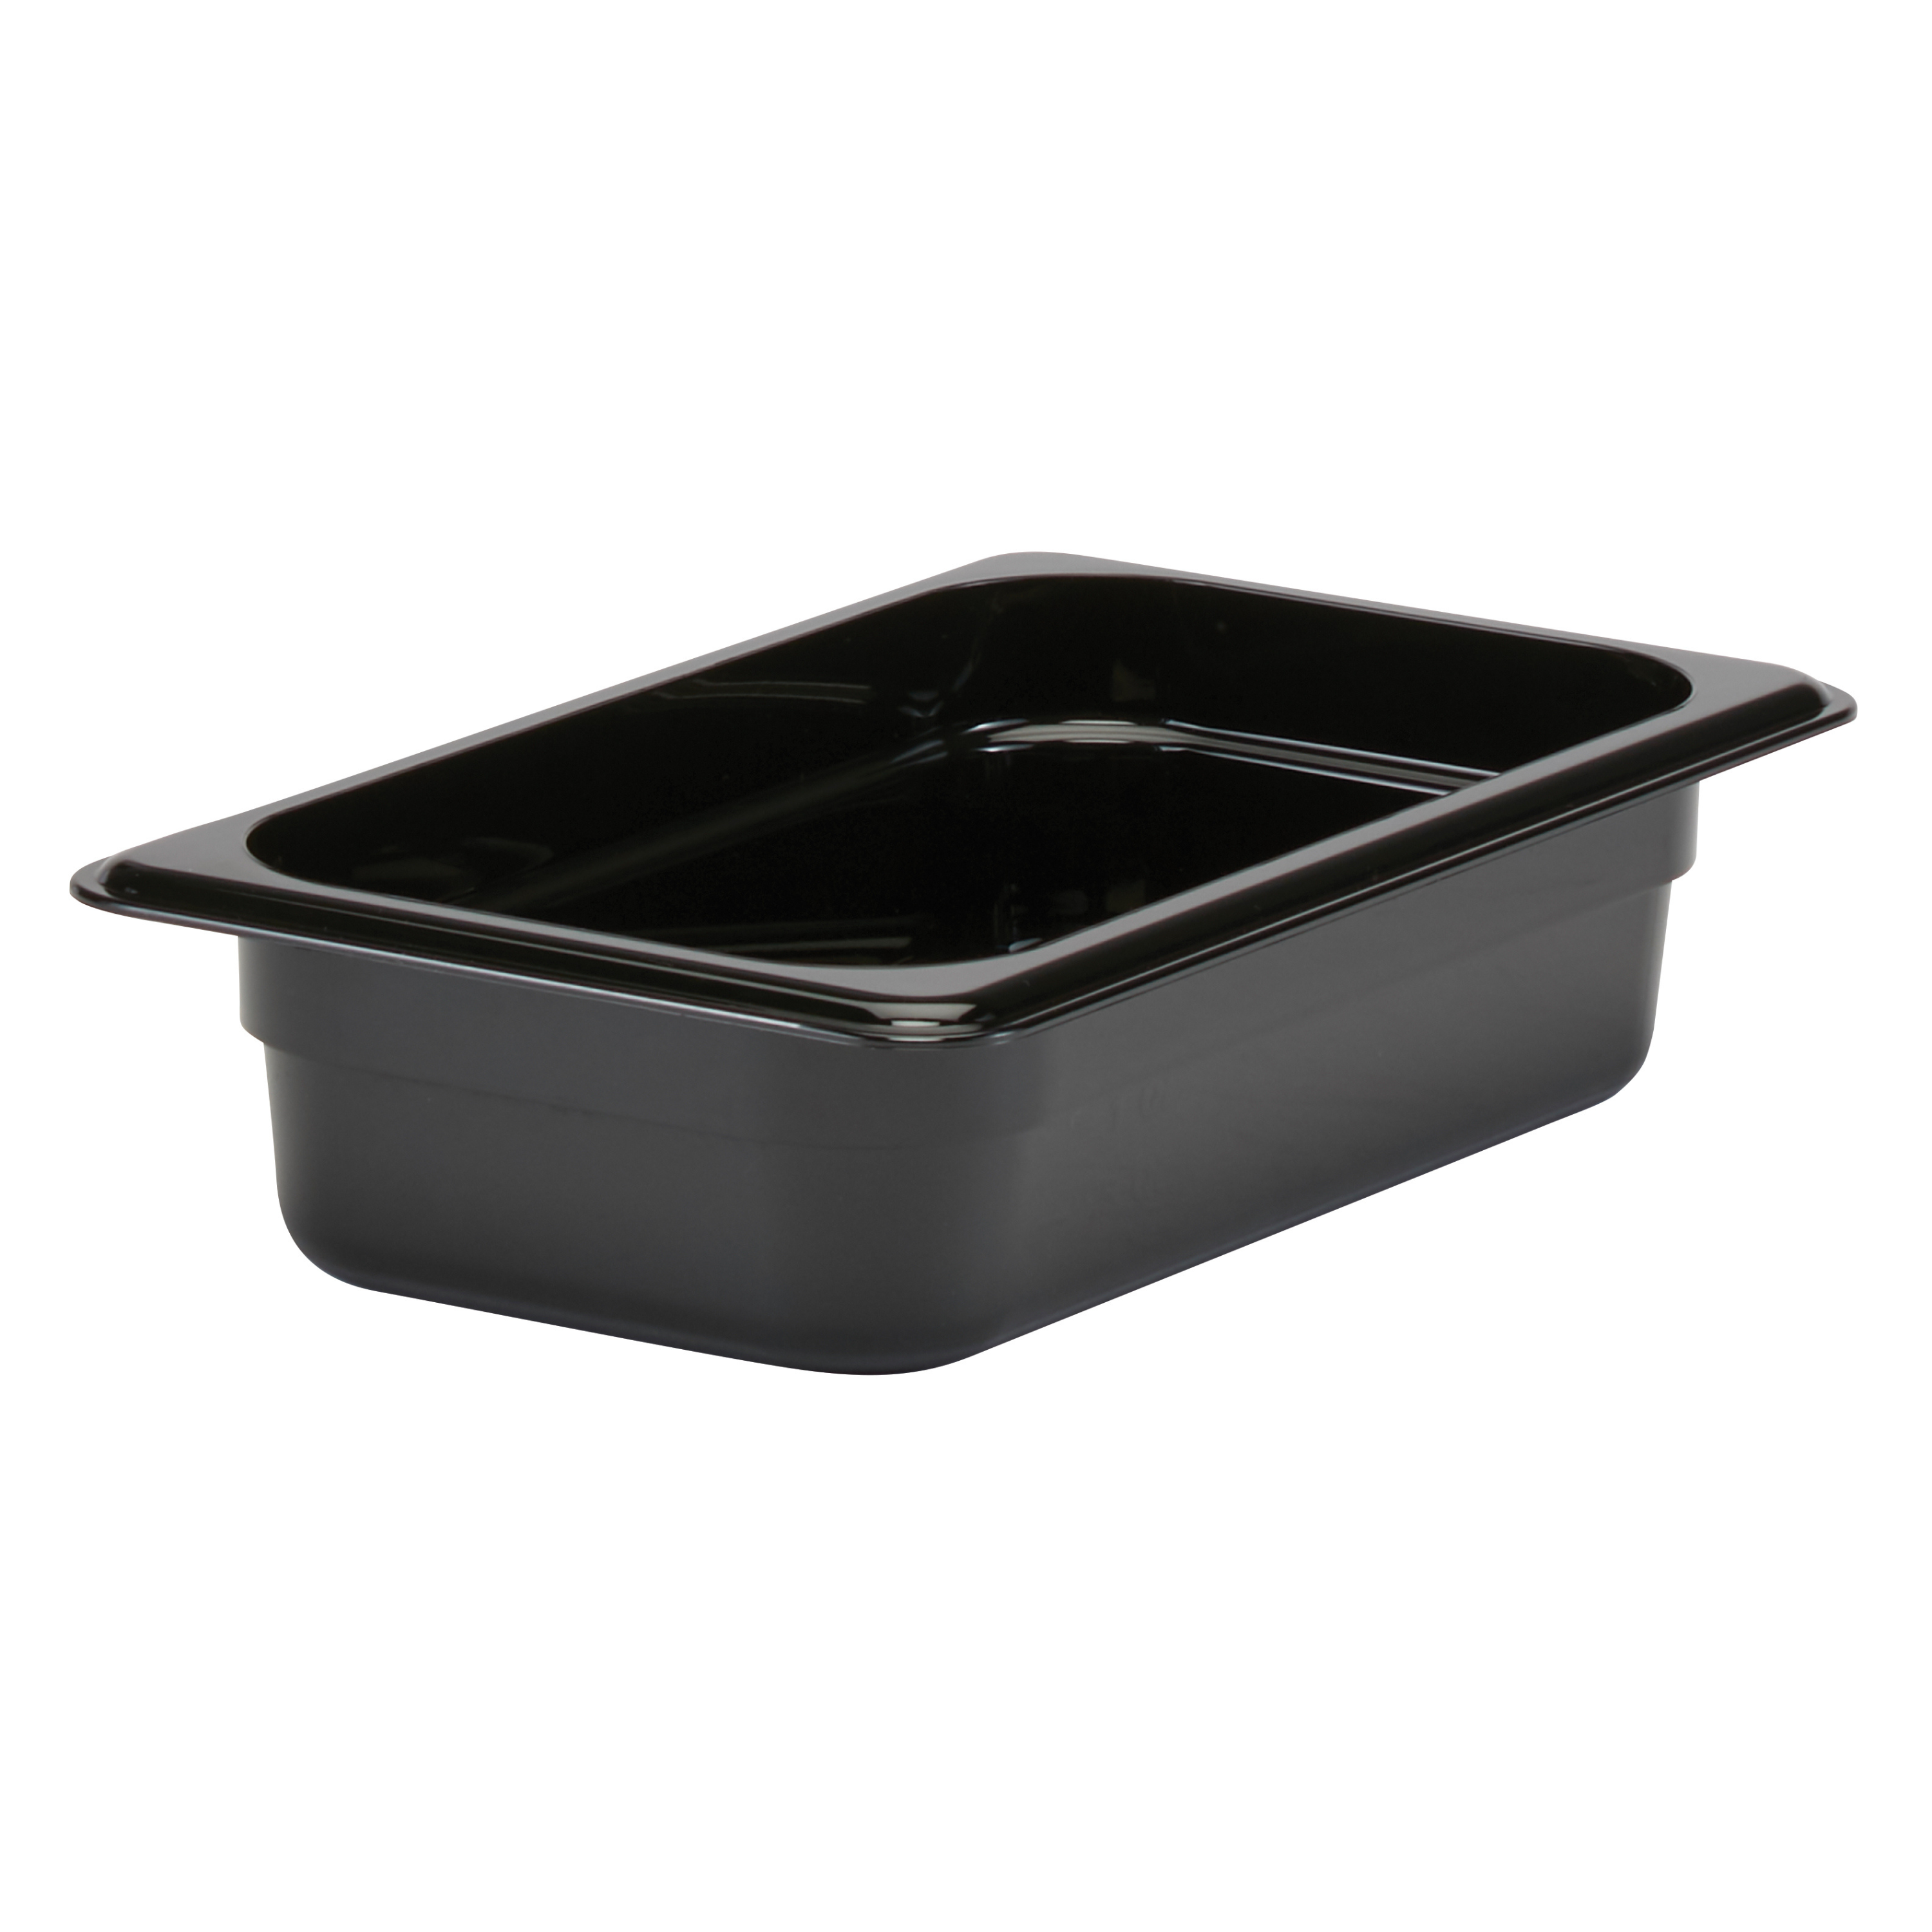 HNEDSEN 12 Pack Plastic Food Pan with Lid 1/6 Size 6 Inch Deep